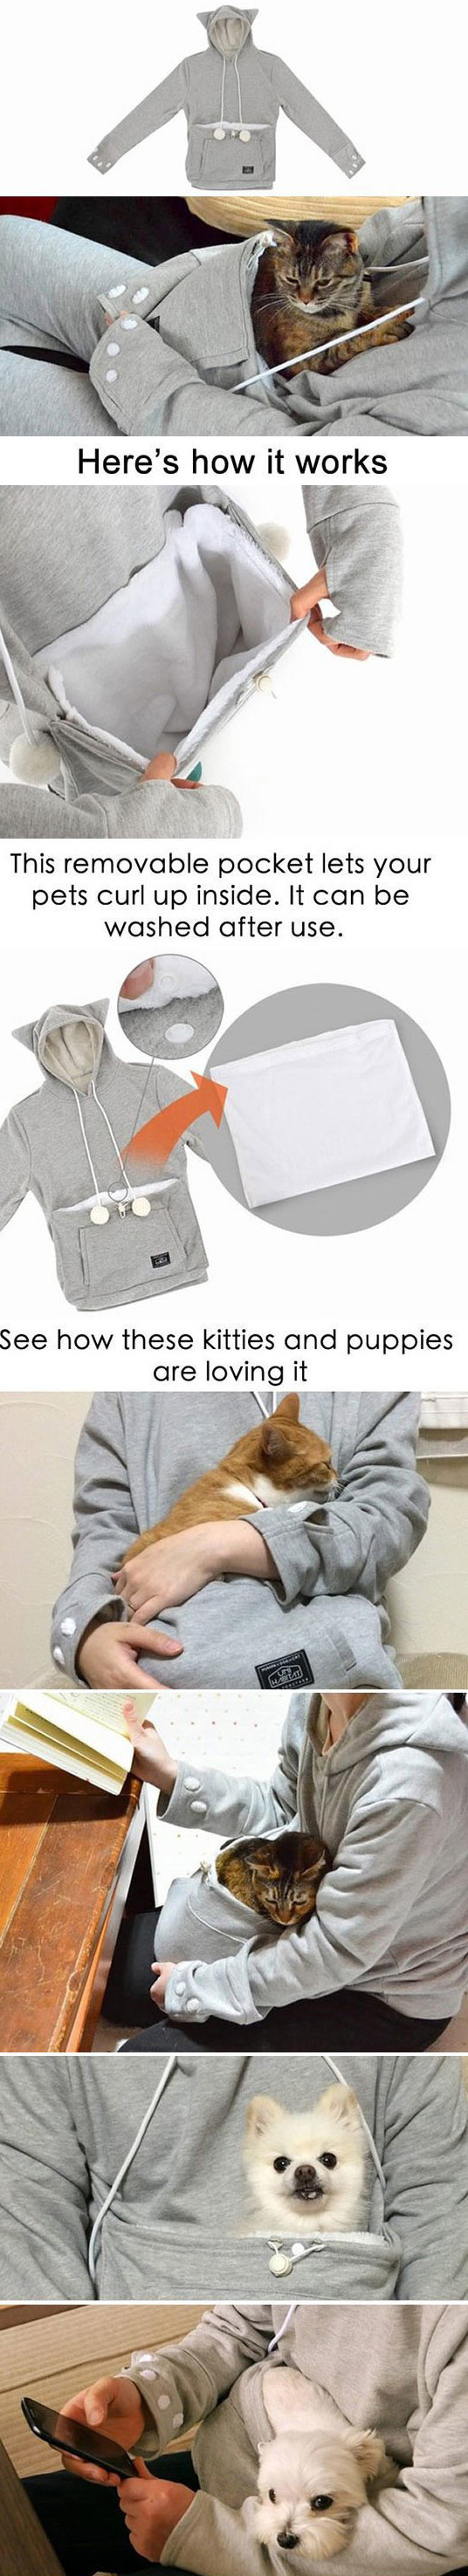 cool-hoodie-for-pets-cats-dogs